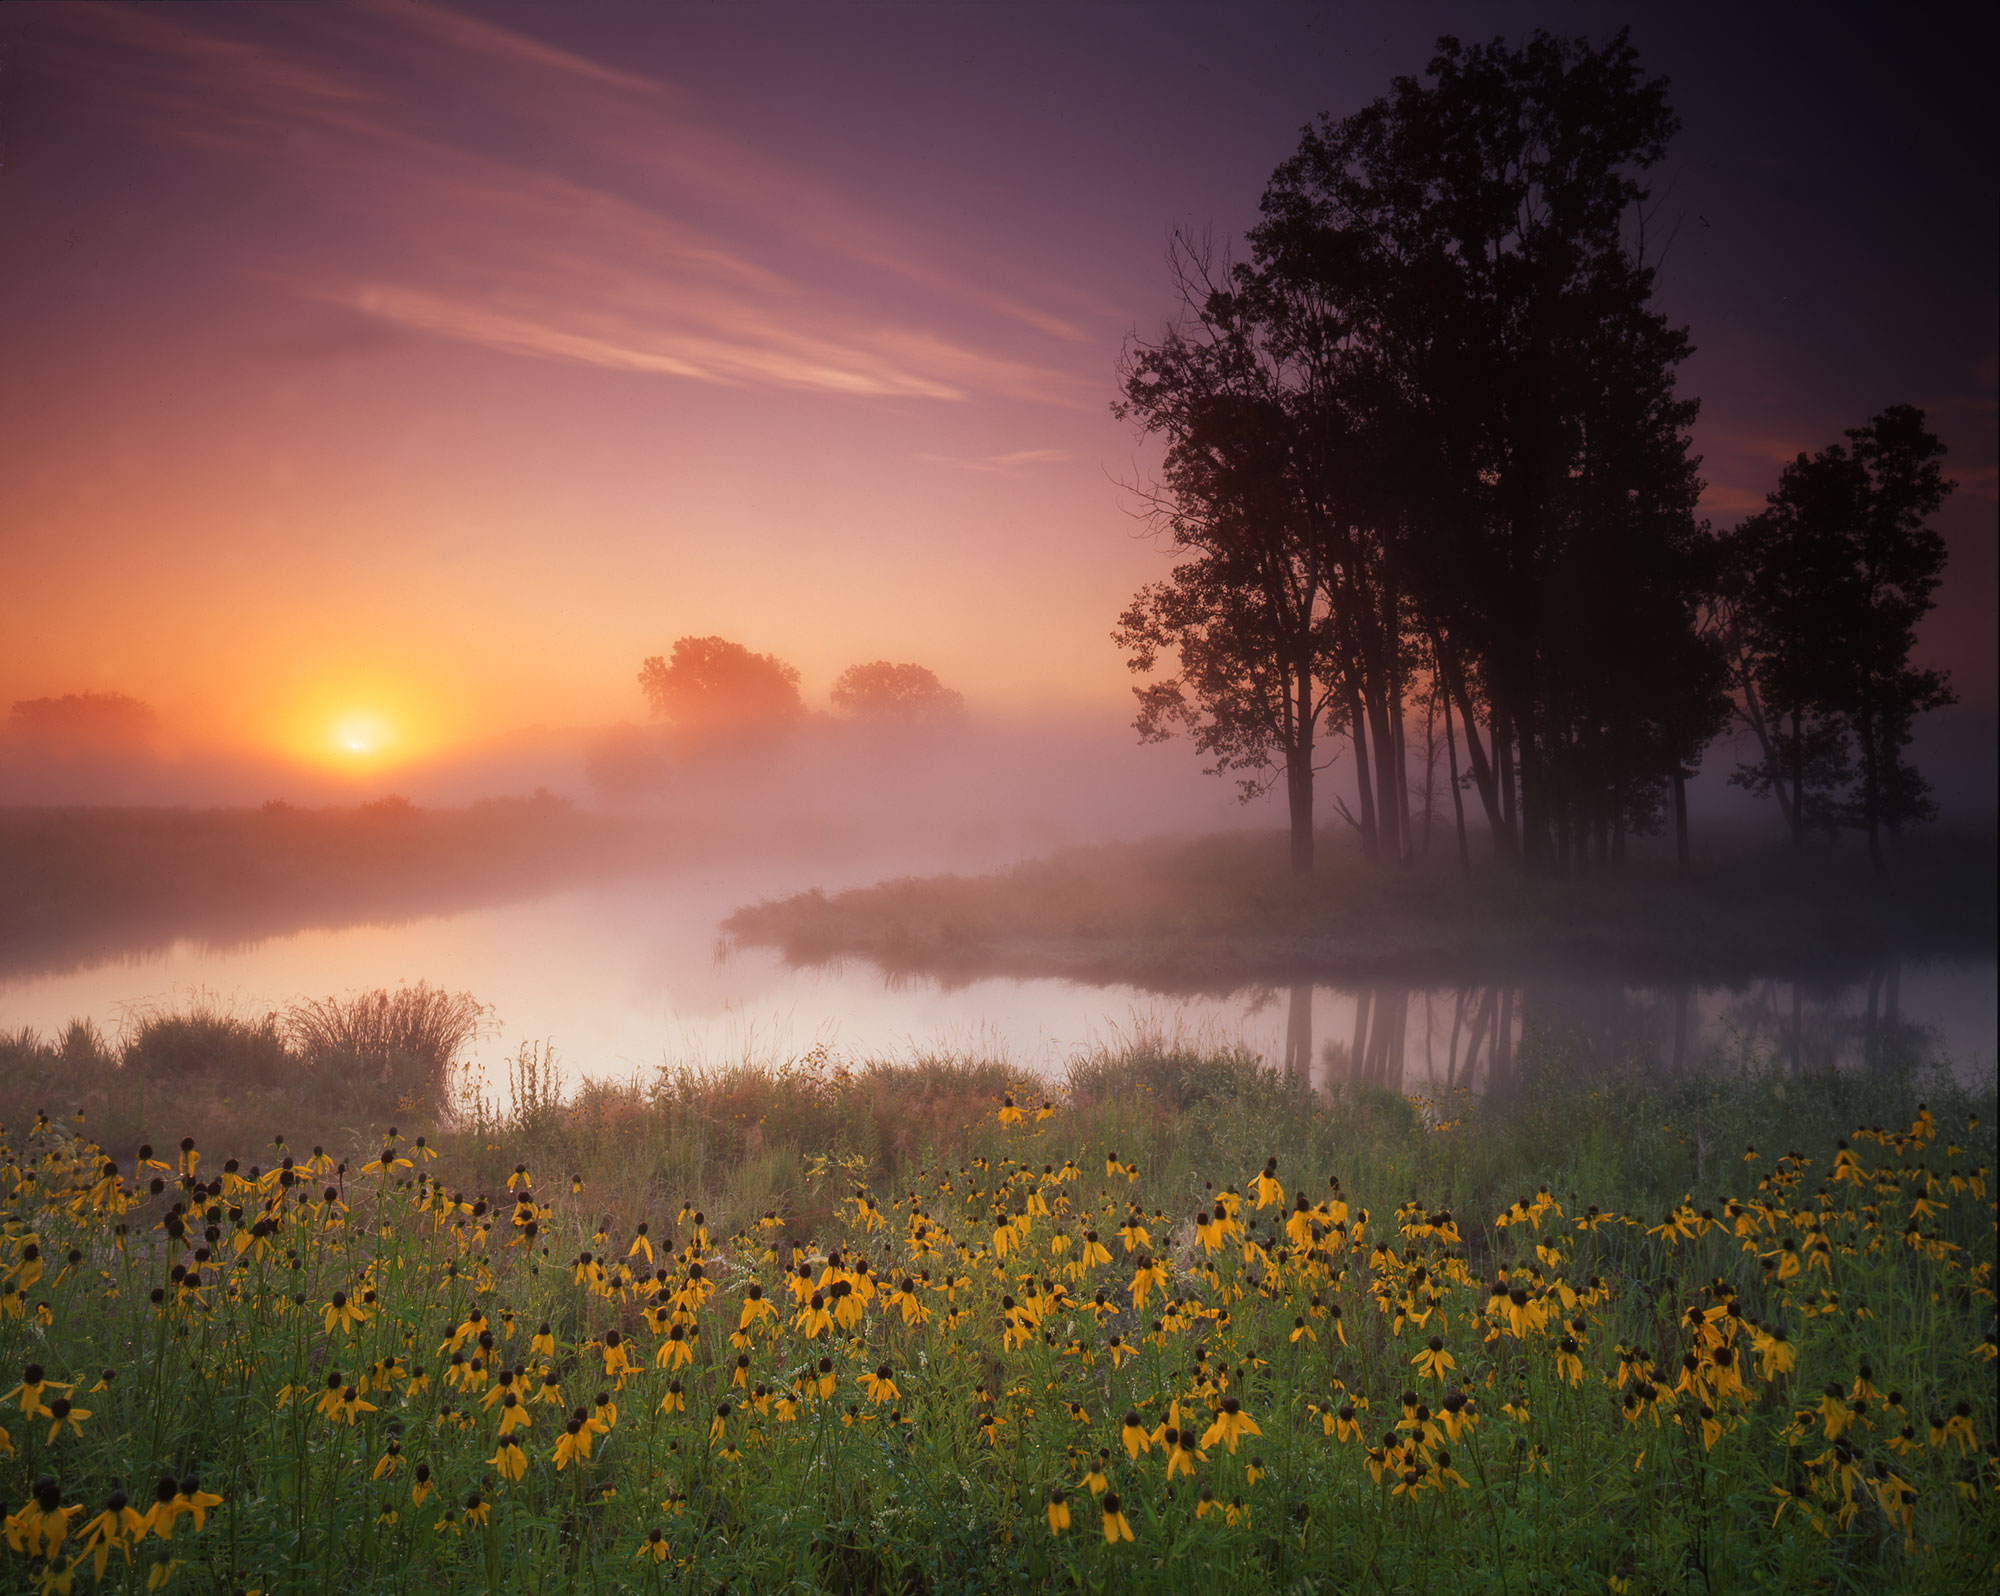 Sunrise over a river with yellow flowers.